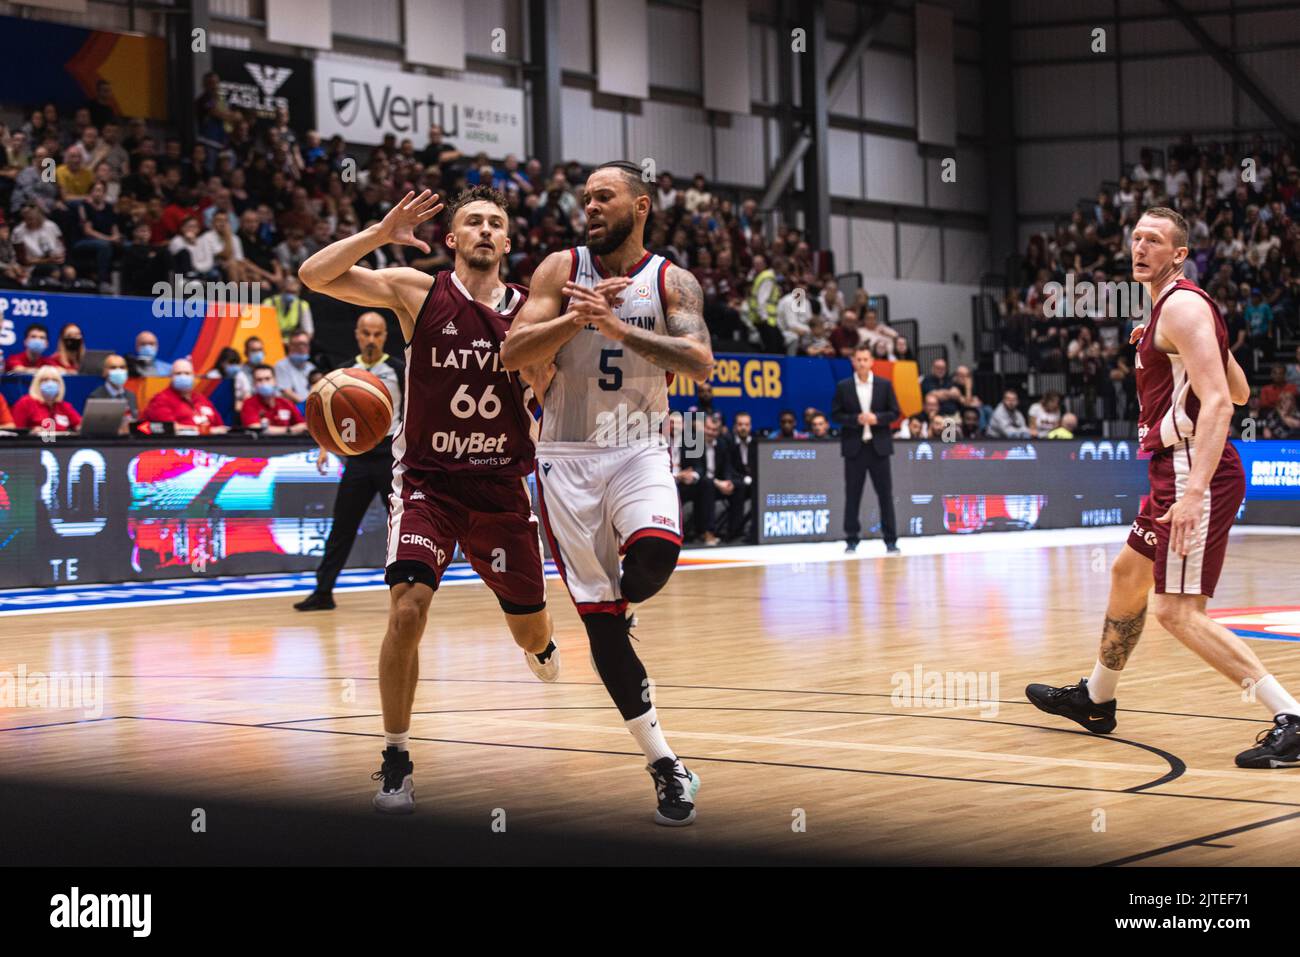 Great Britain nation mens team (team GB)play Latvia in a FIBA World Cup qualifying game at Newcastle Vertu Arena on 28 August 2022. Team GB lose 80 - 87.Copyright  Caroljmoir/Alamy Stock Photo